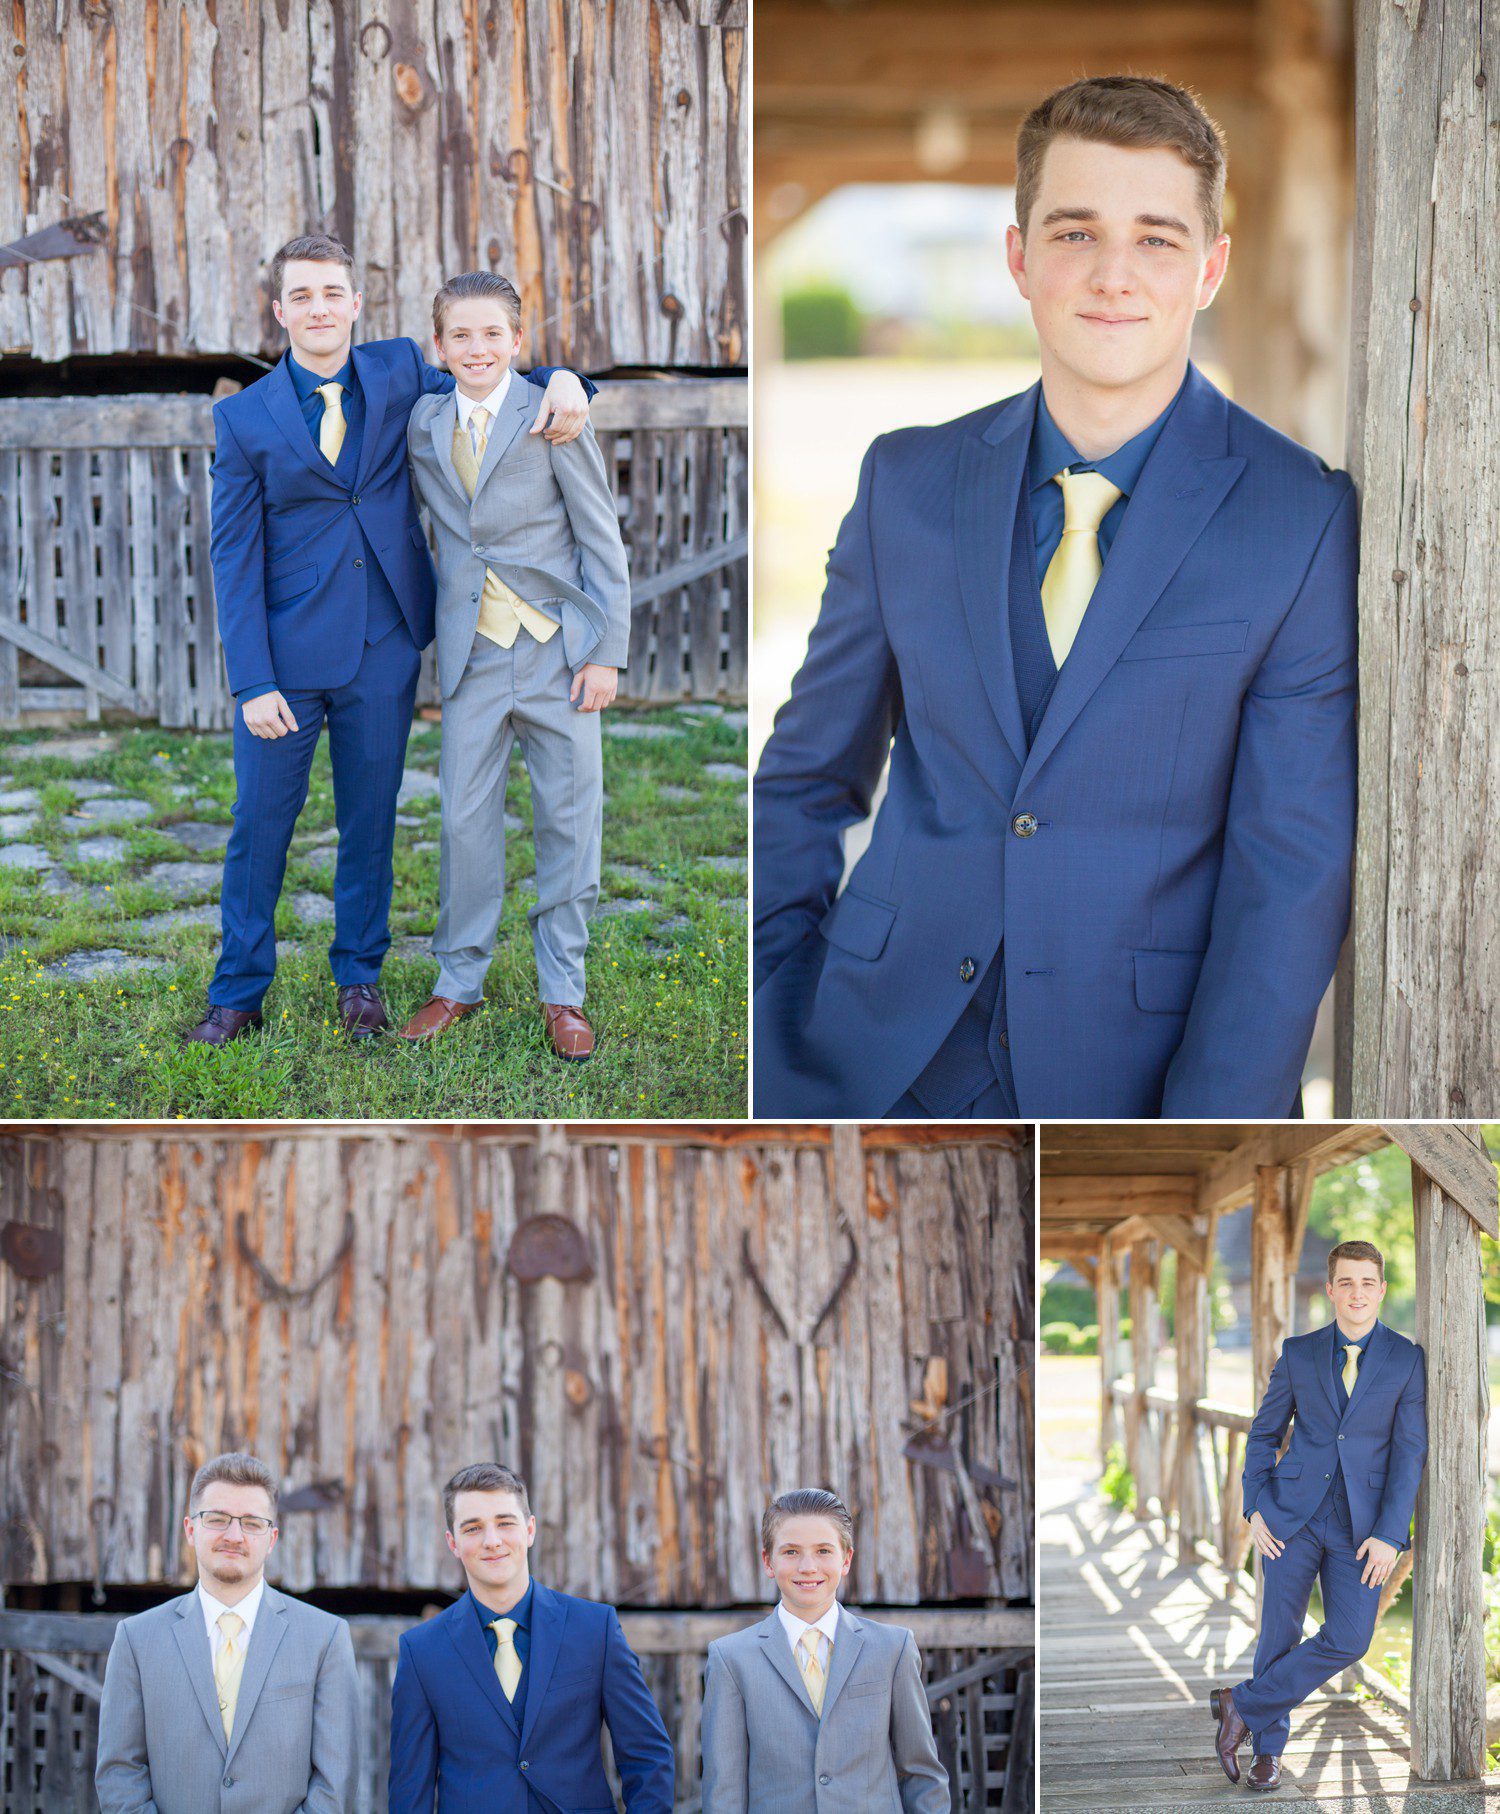 Groom and groomsmen photos before wedding at Legacy Farms in Lebanon, TN, photos by Krista Lee Photography 